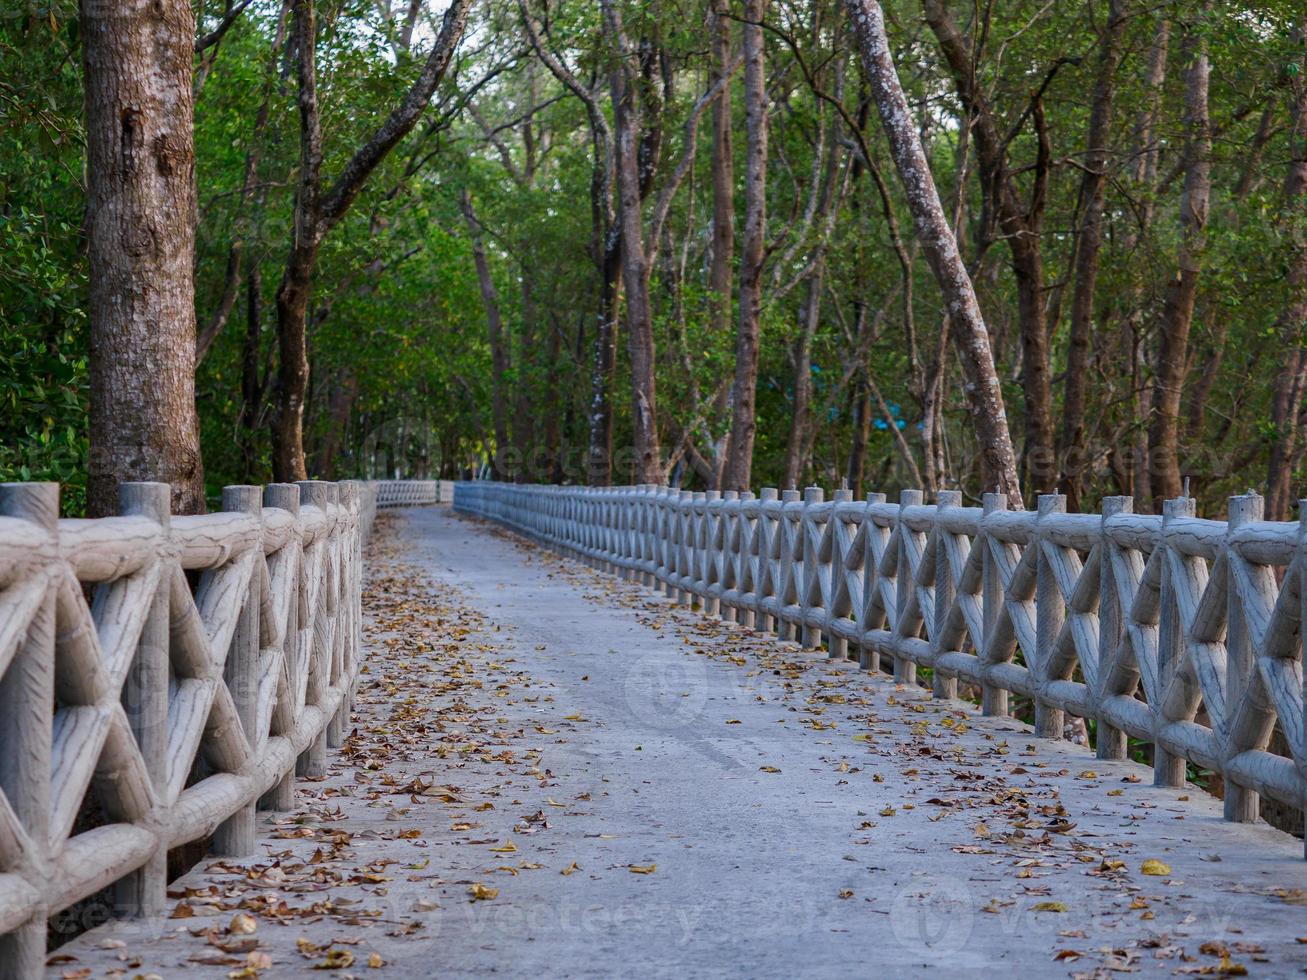 Concrete walkway along the coast of the mangrove forest photo